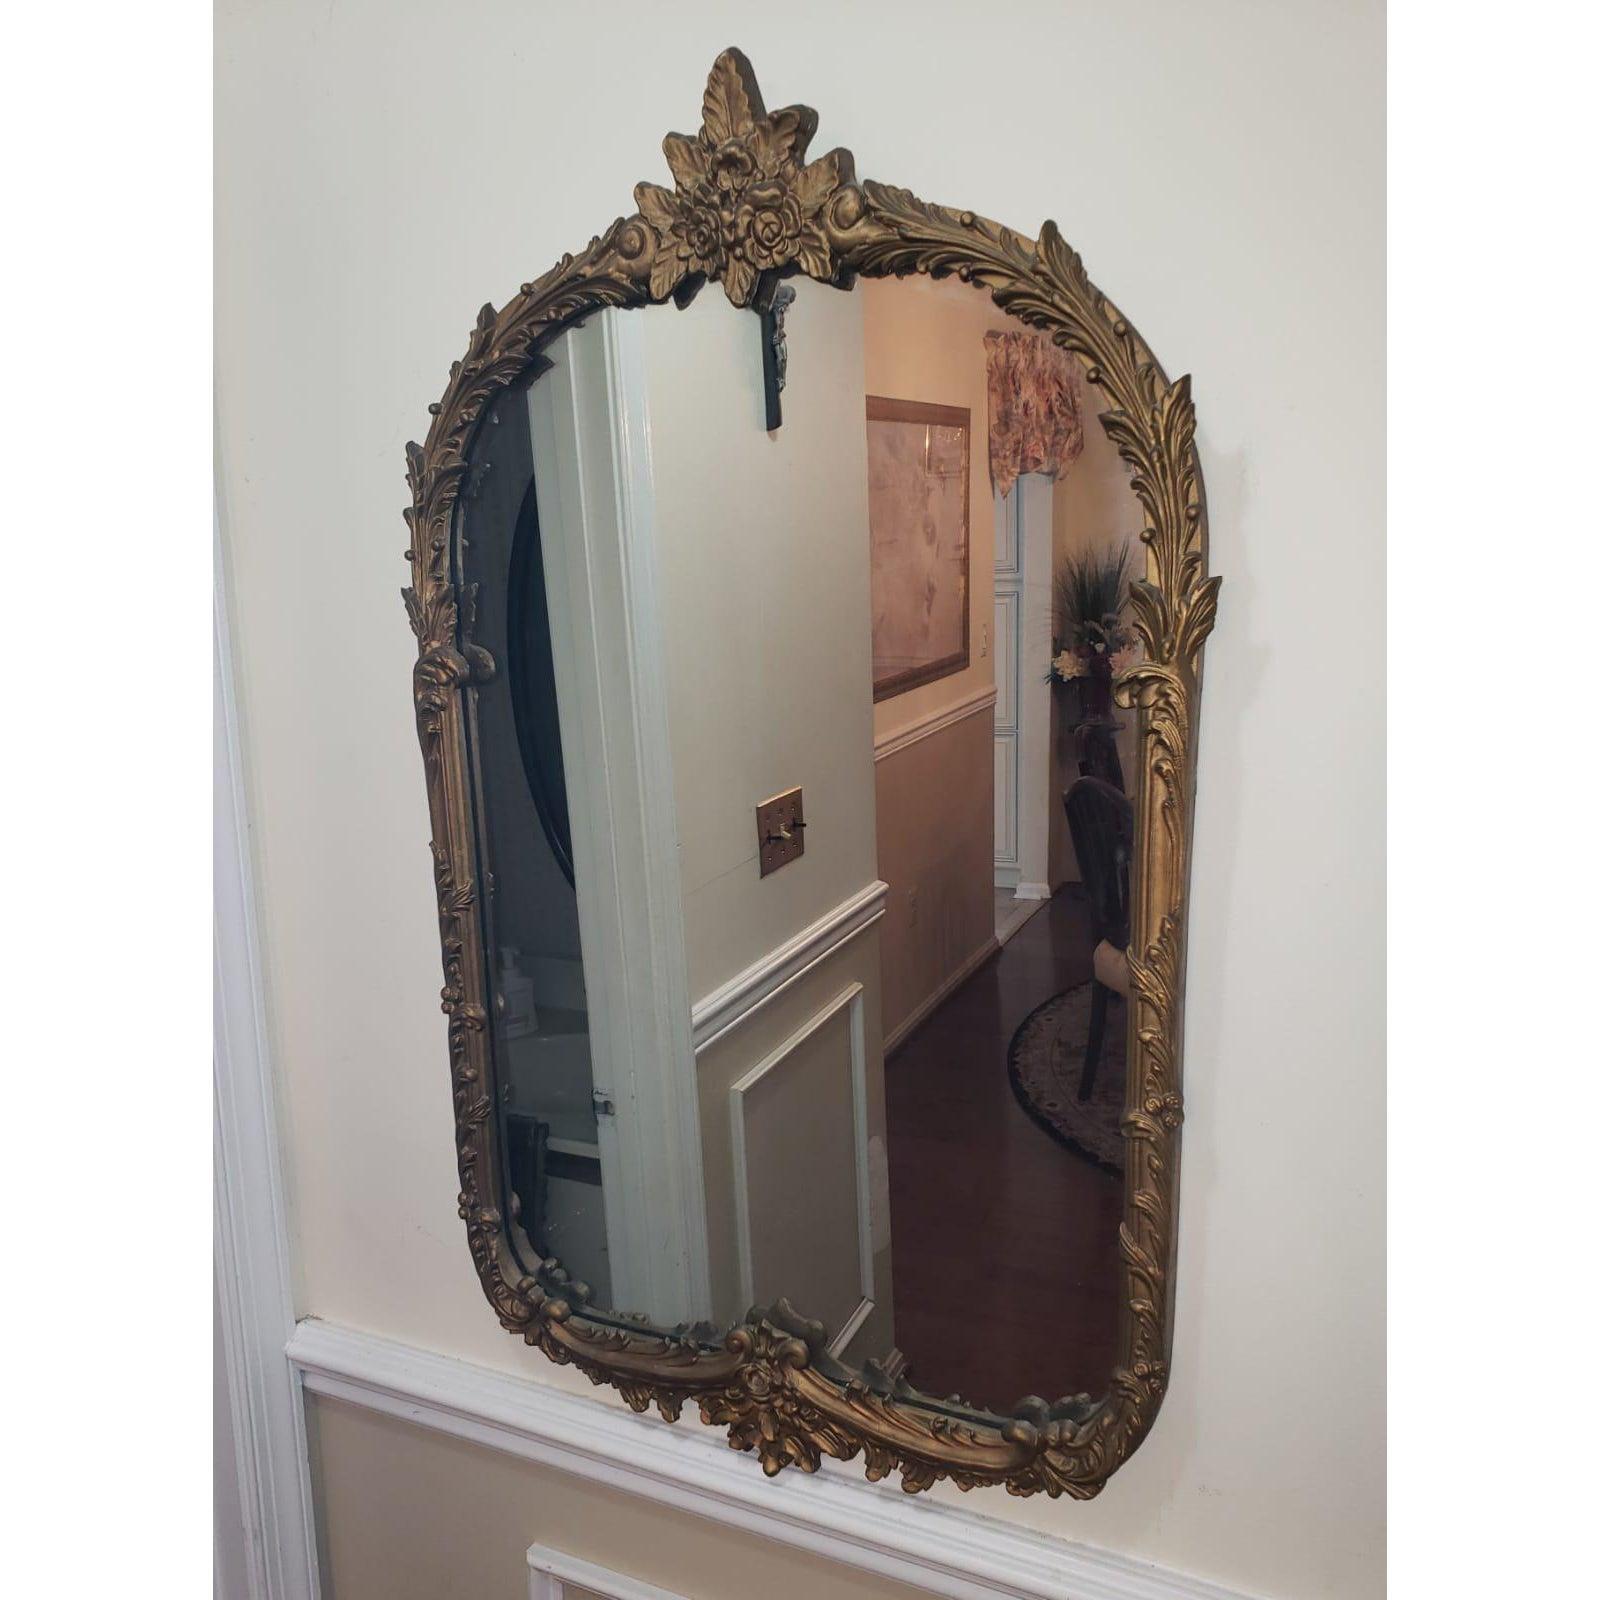 Real giltwood ornate mirror from the 1940s. Mirror shows signs of aging appropriate with actual age.
Measures: 22W x 34H.